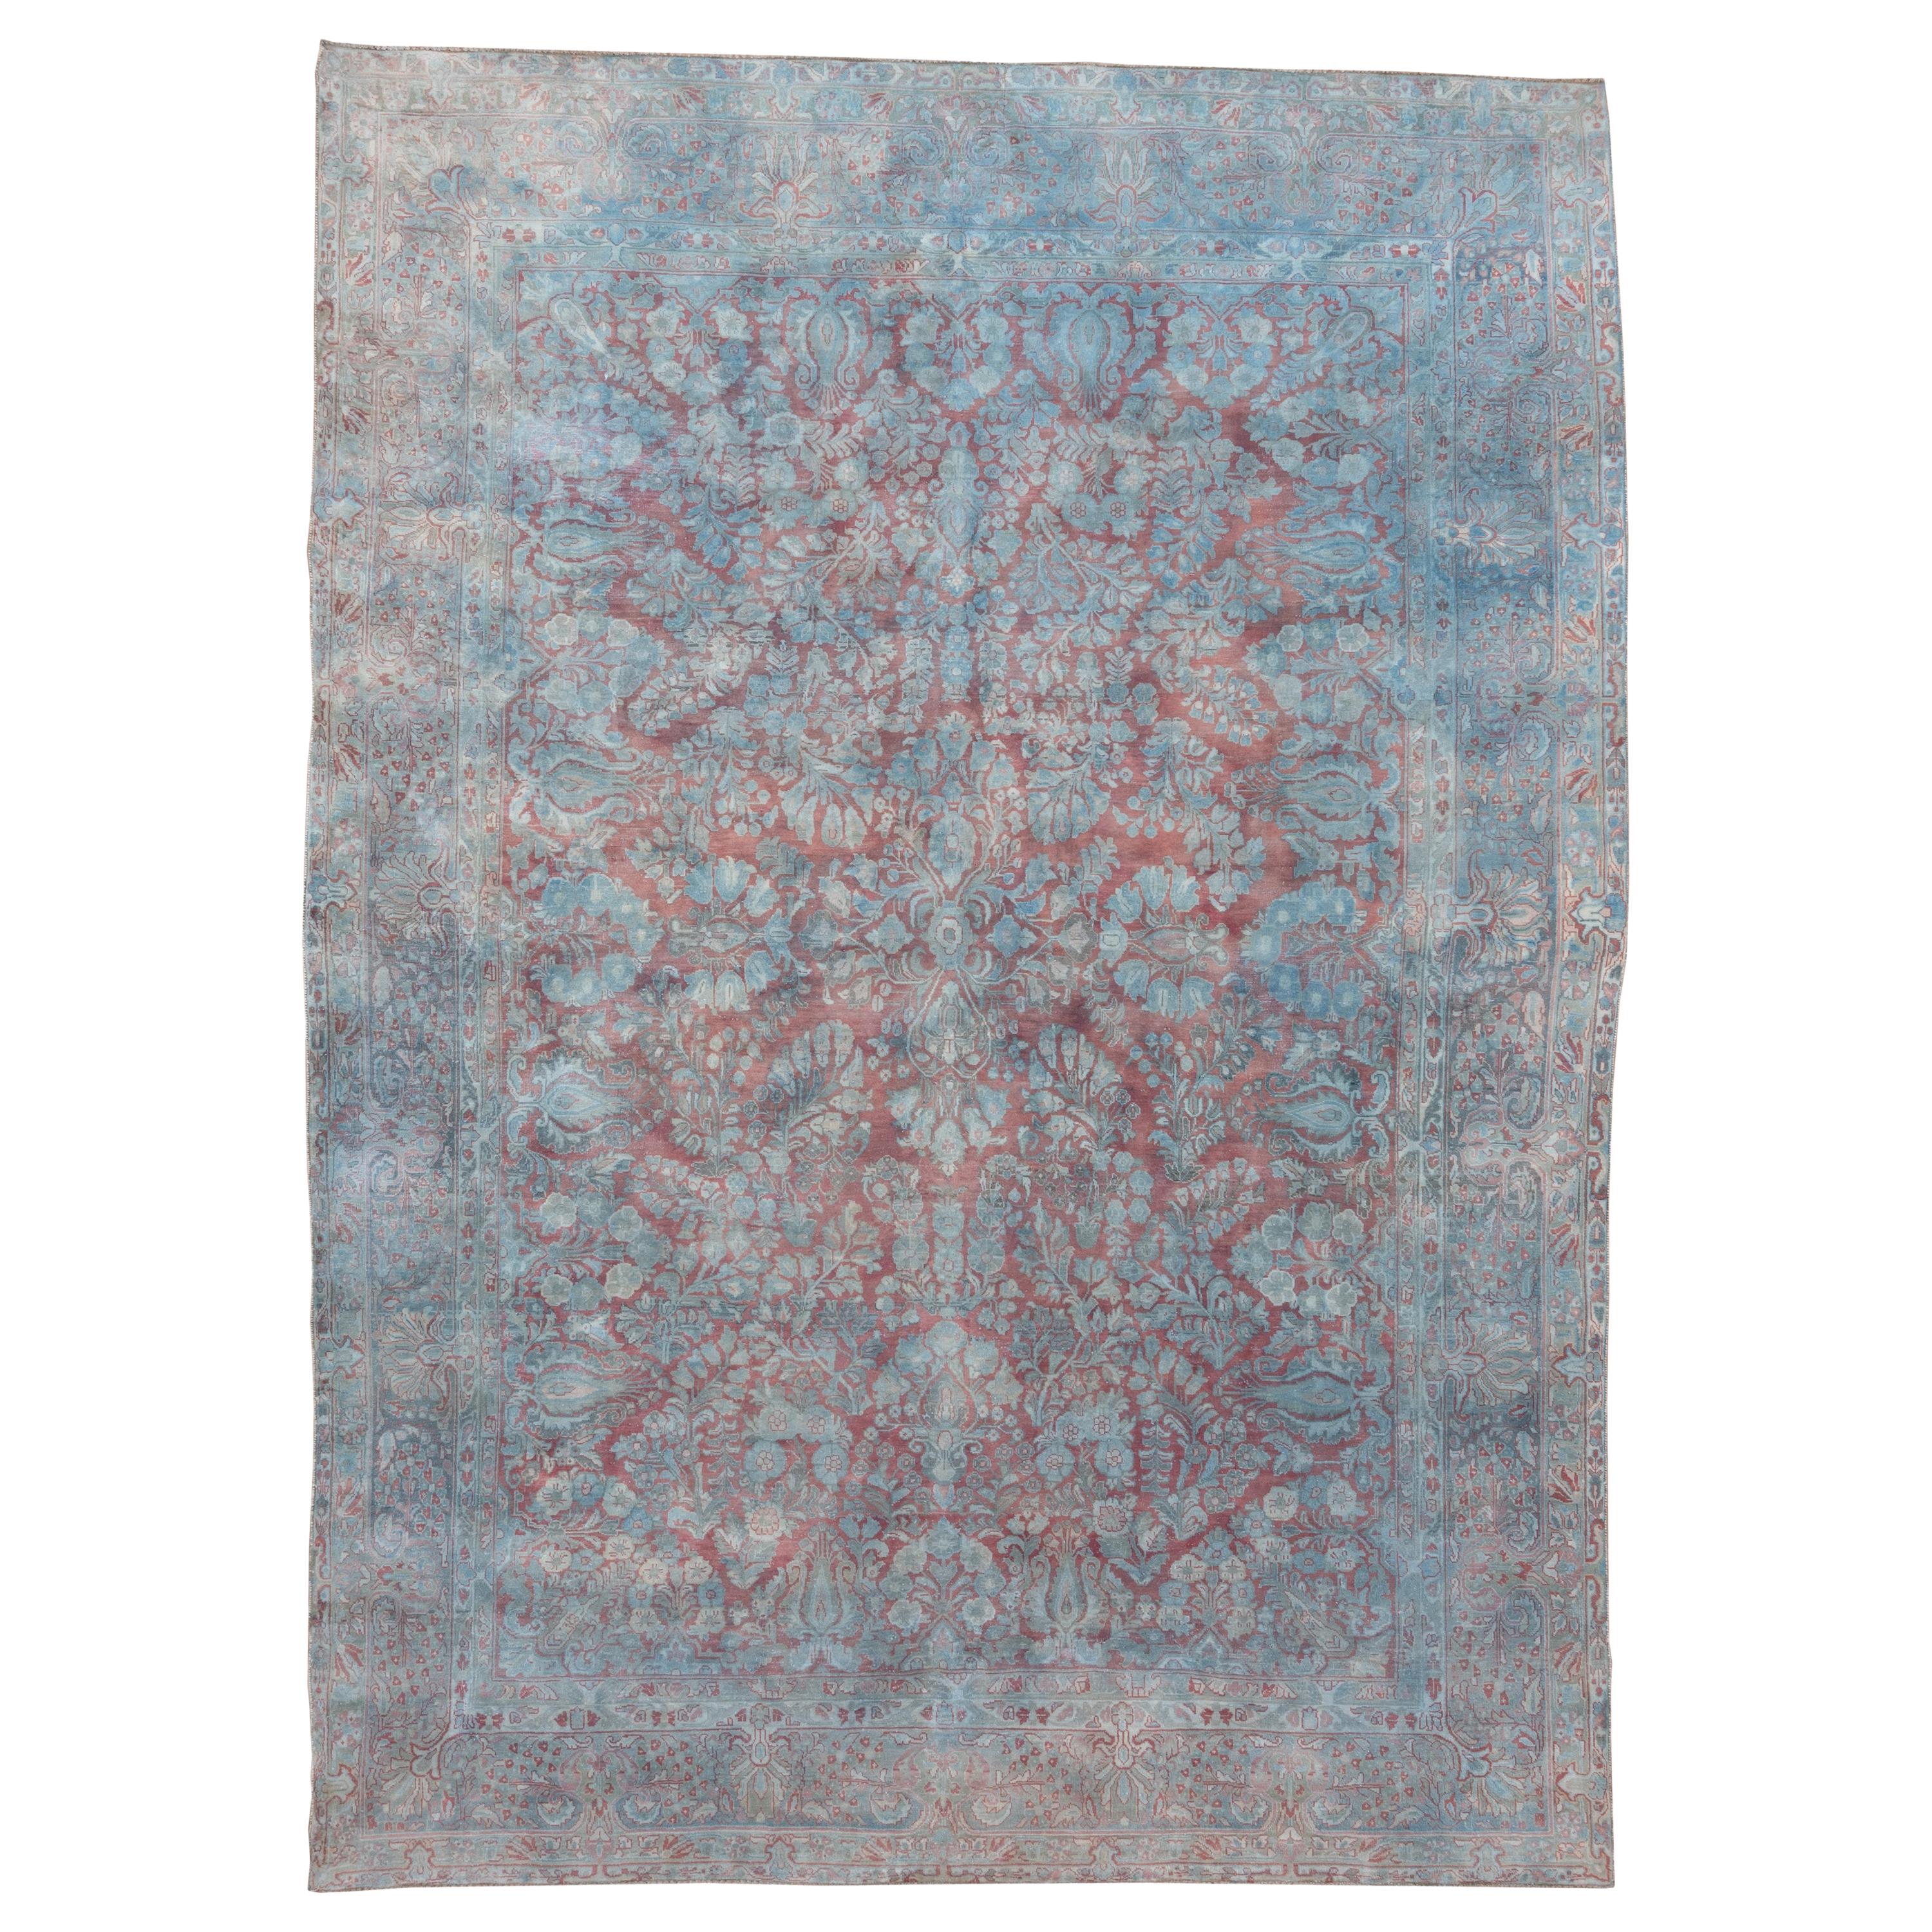 Antique America Sarouk Carpet, Pink Red and Blue Accents For Sale